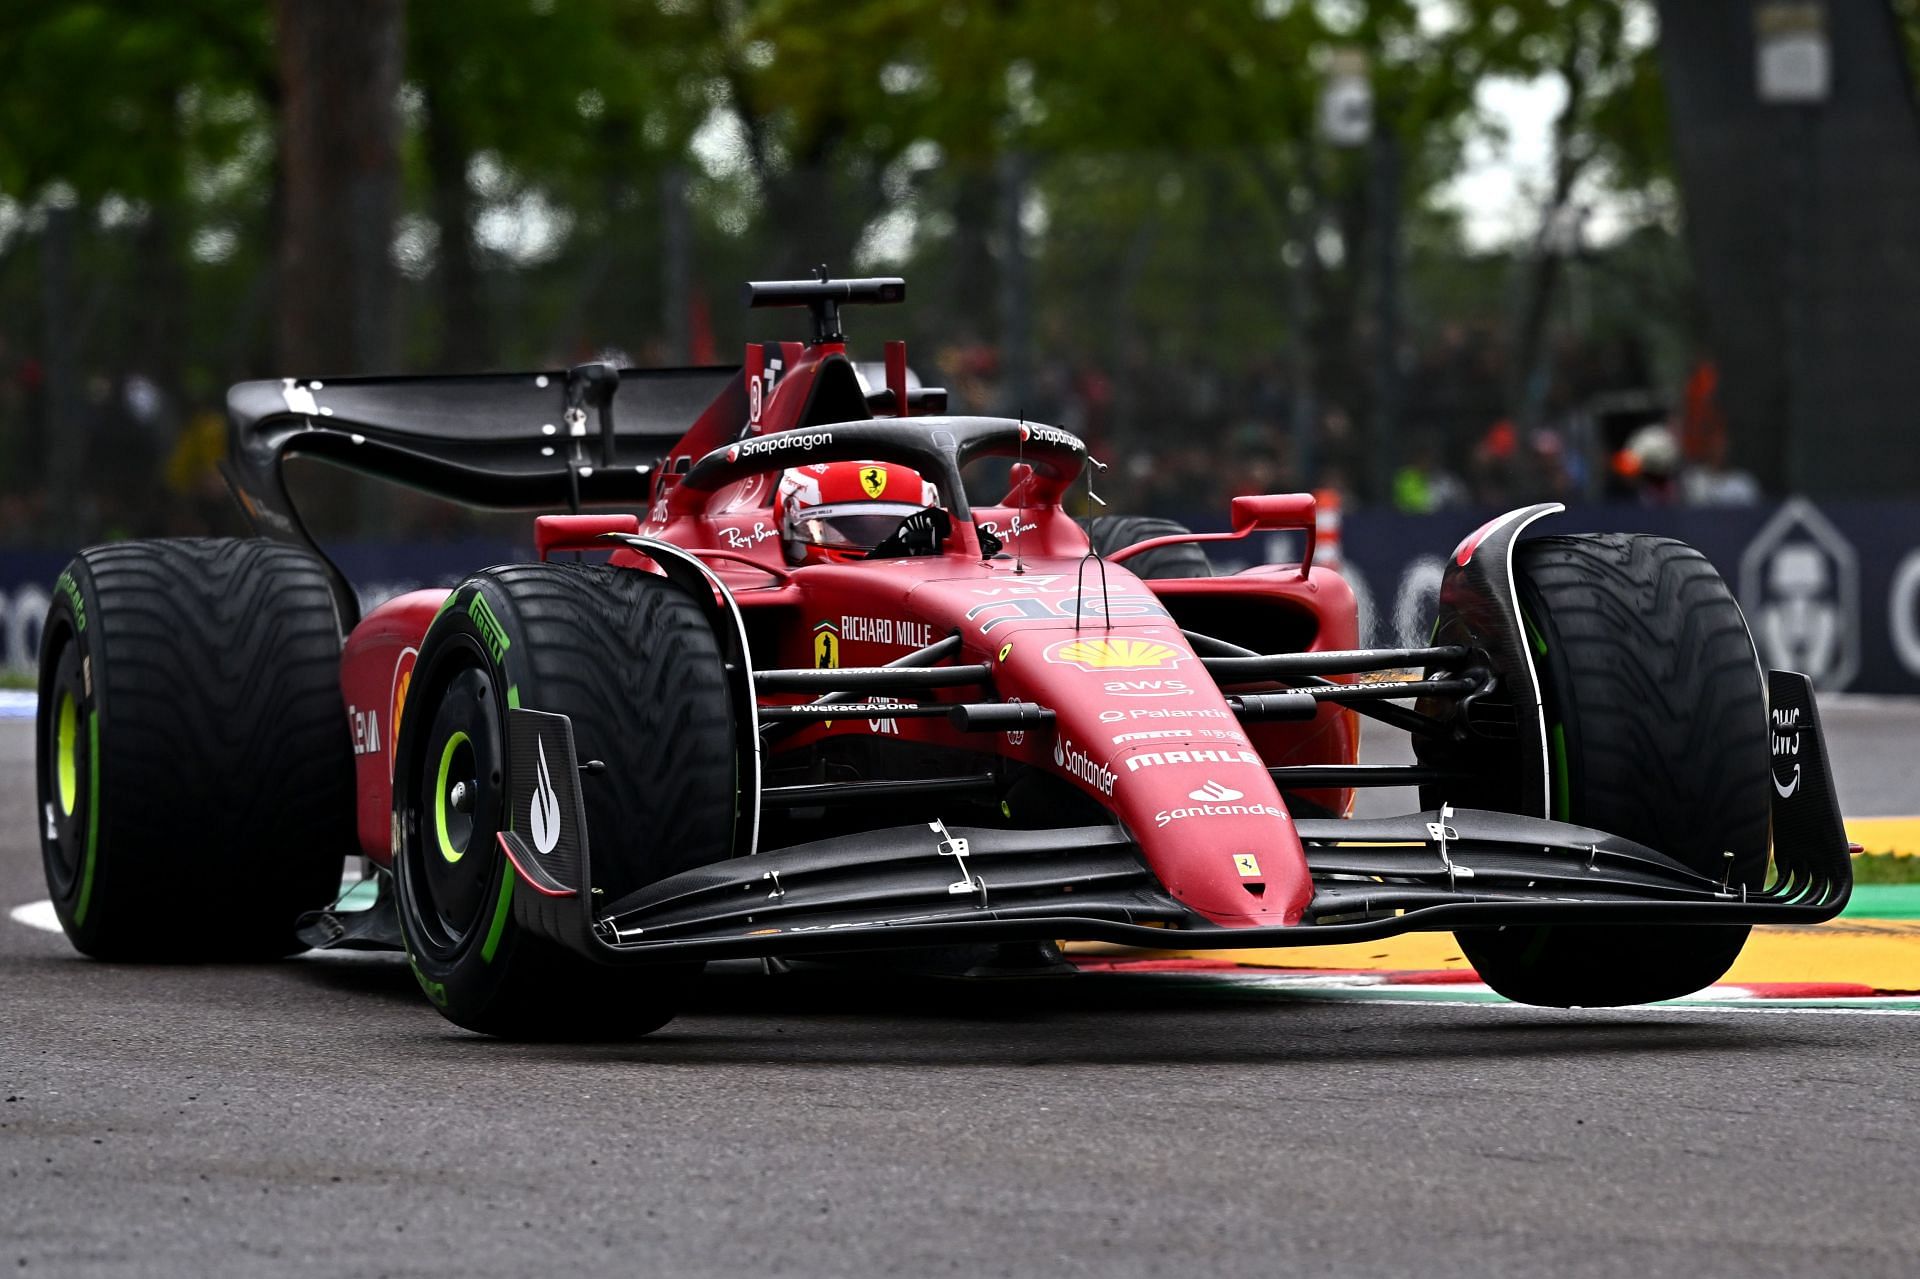 Ferrari driver Charles Leclerc in action during the 2022 F1 Imola GP (Photo by Clive Mason/Getty Images)